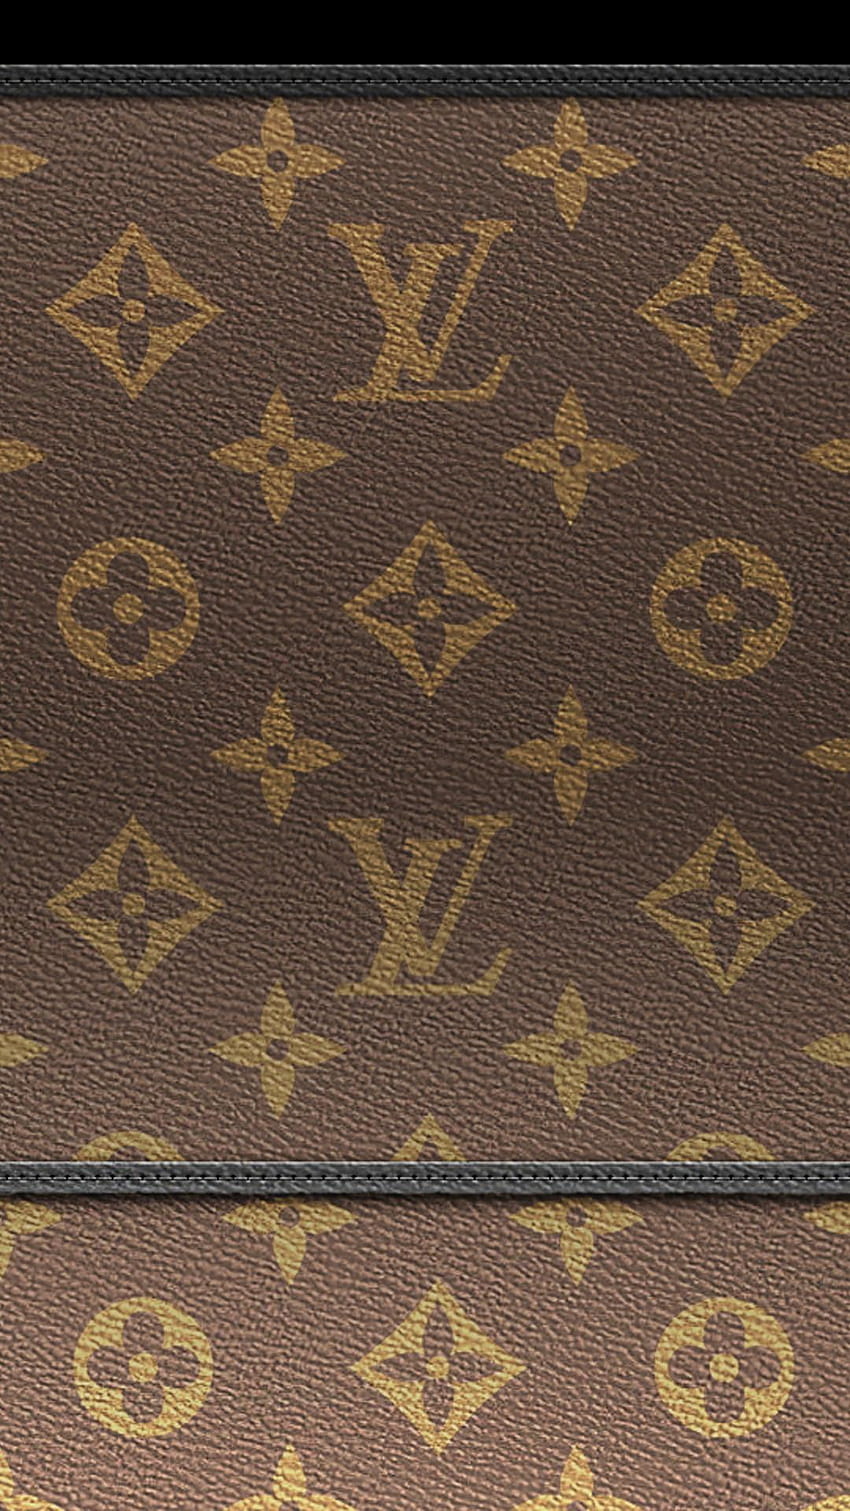 Louise Vuitton Obsessed iPhone Wallpaper - Idea Wallpapers